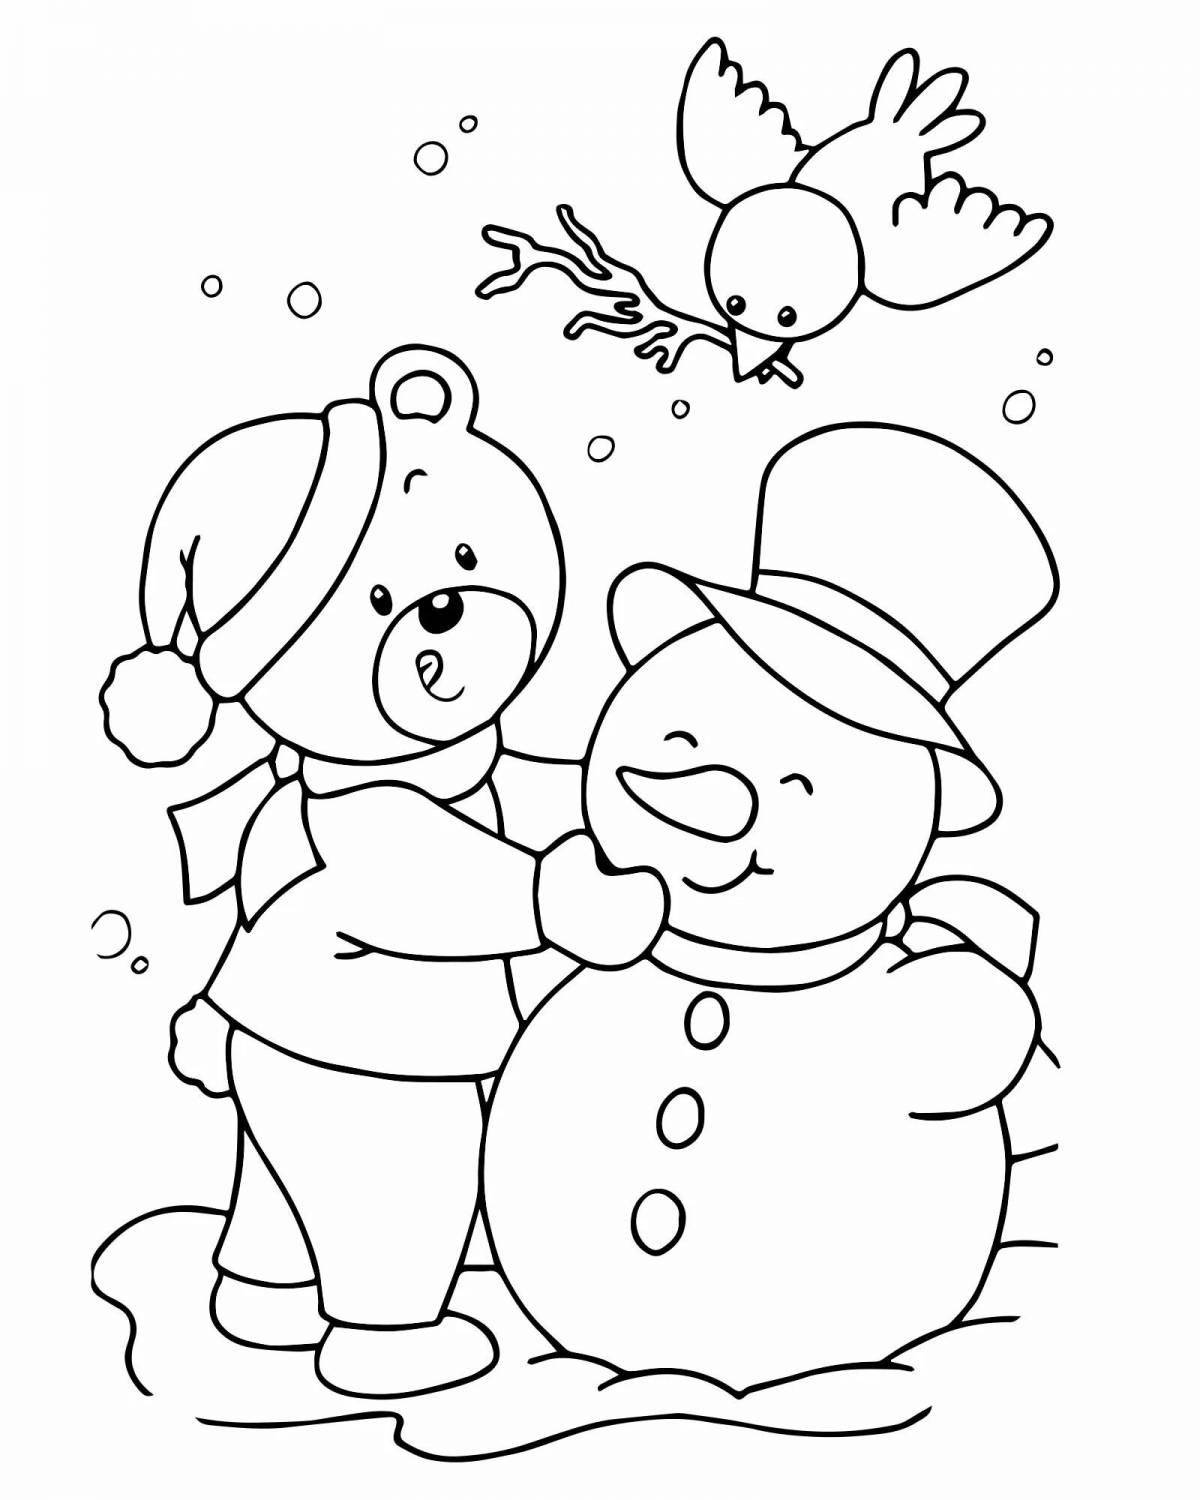 Bright coloring book for children 2-3 years old for kindergarten in winter